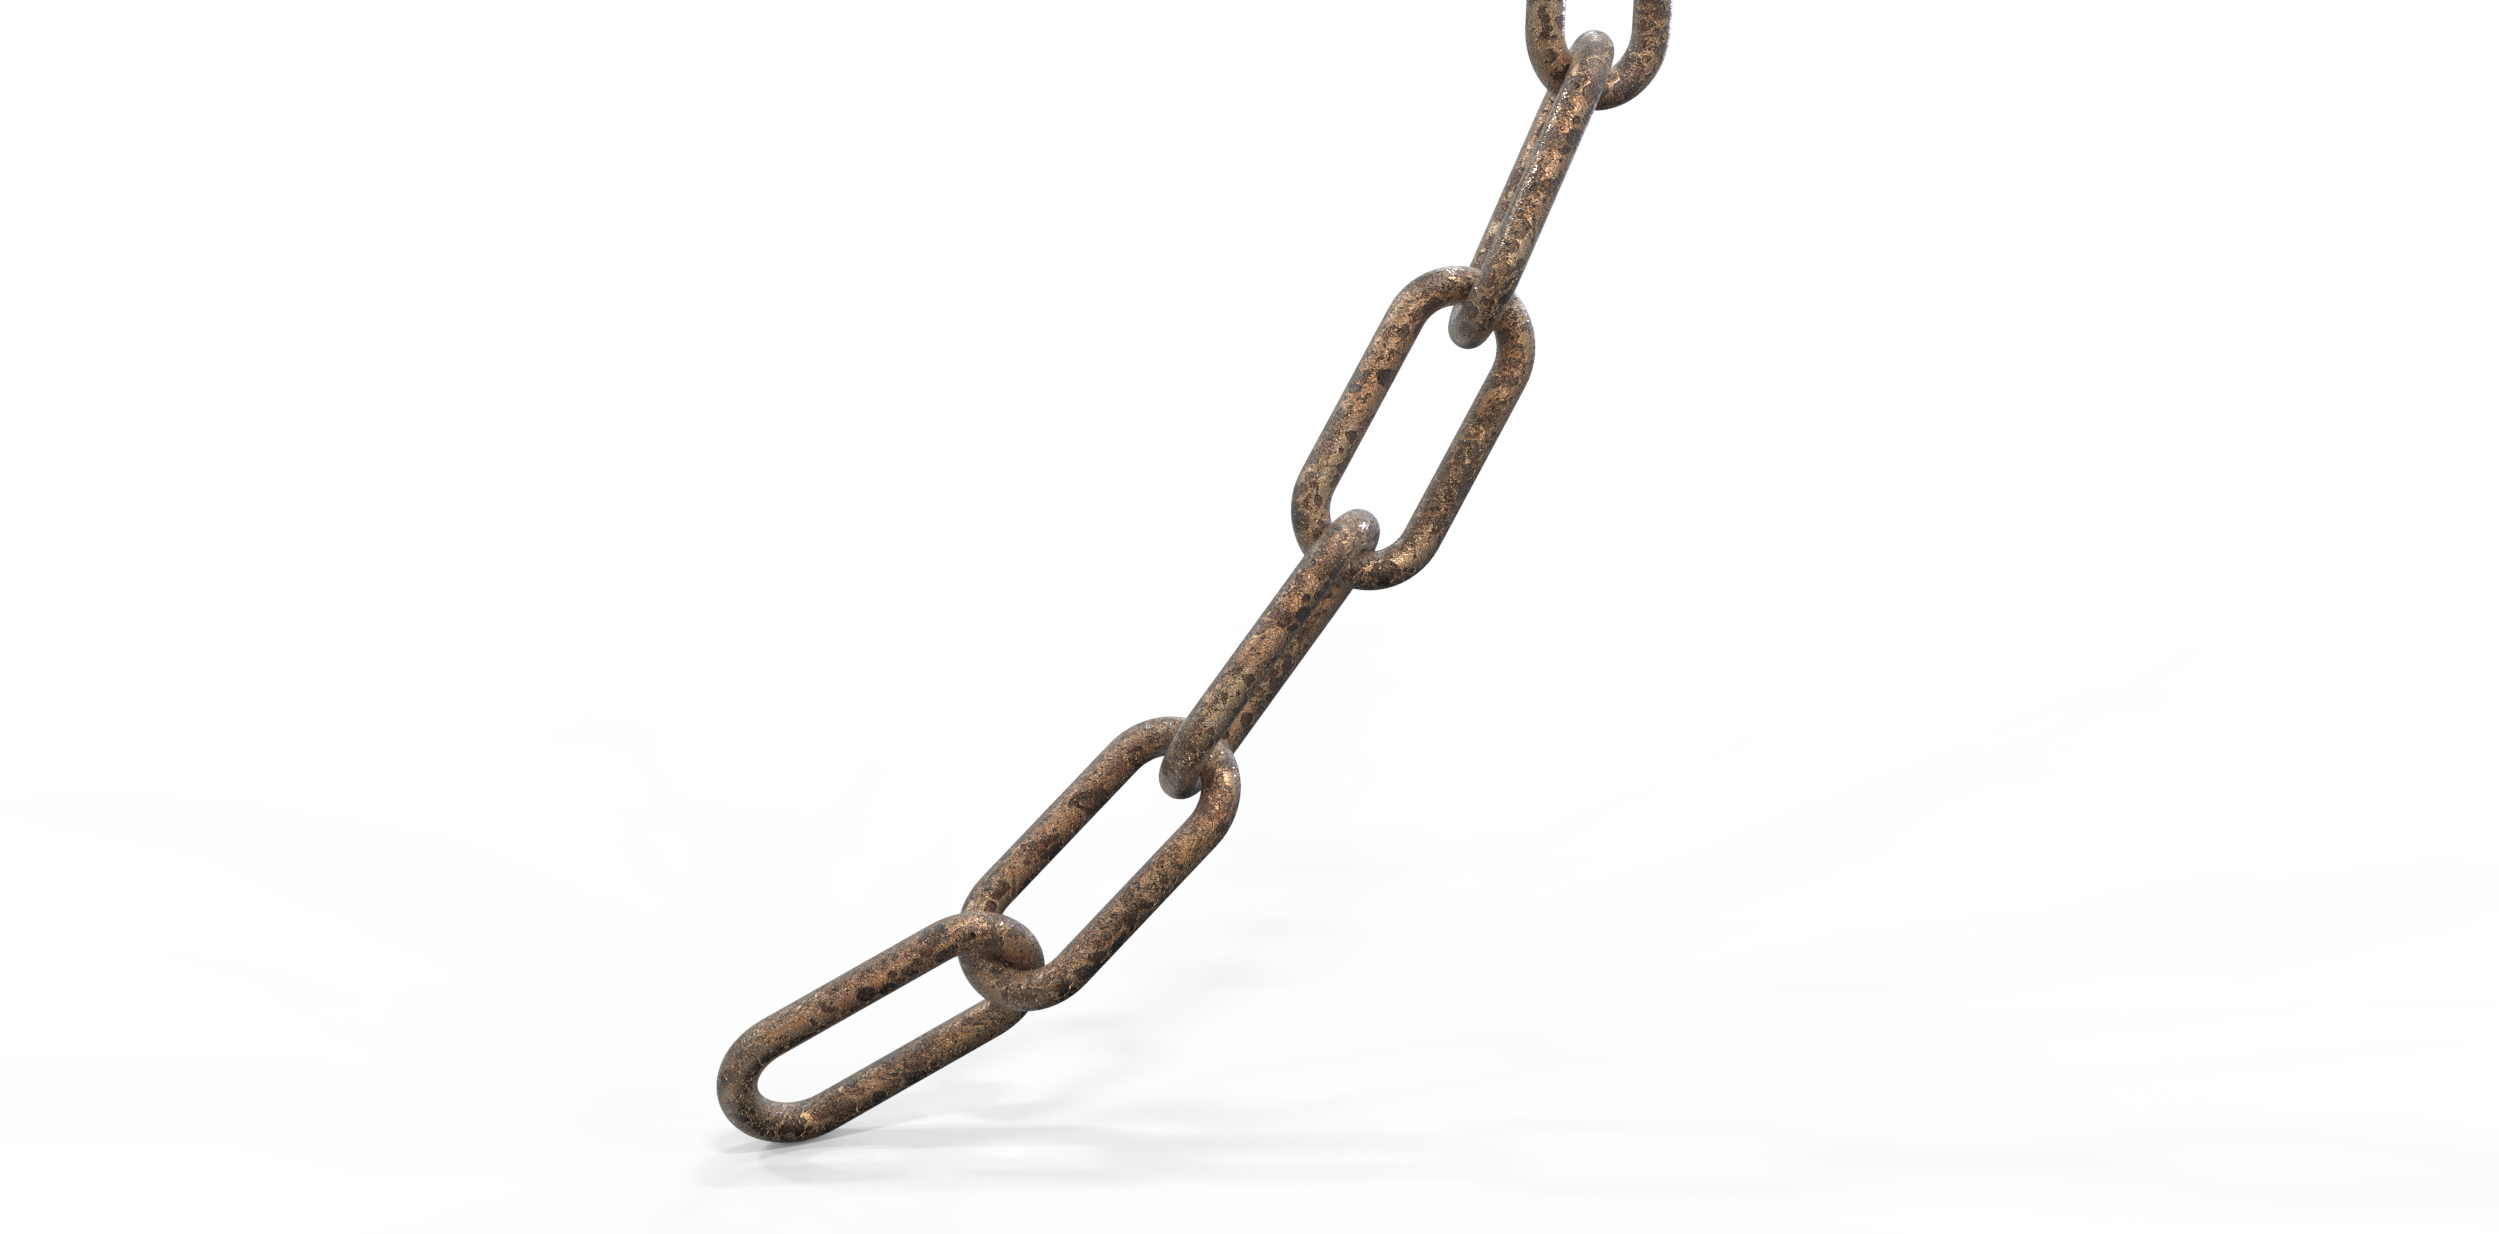 chain clipart animated